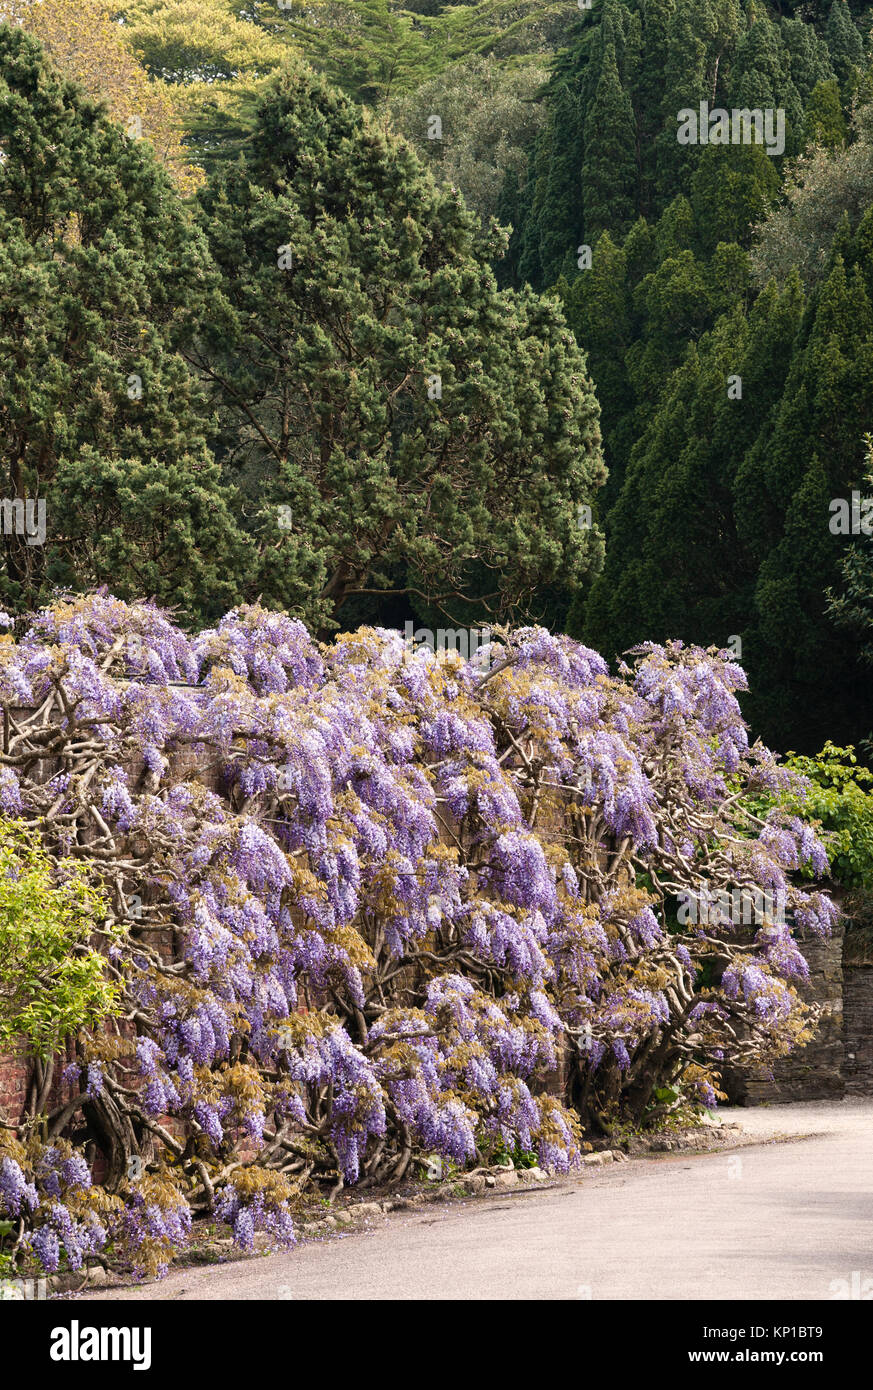 Trelissick garden, Feock, Truro, Cornwall, UK. An old wisteria in full flower near the entrance to the gardens Stock Photo